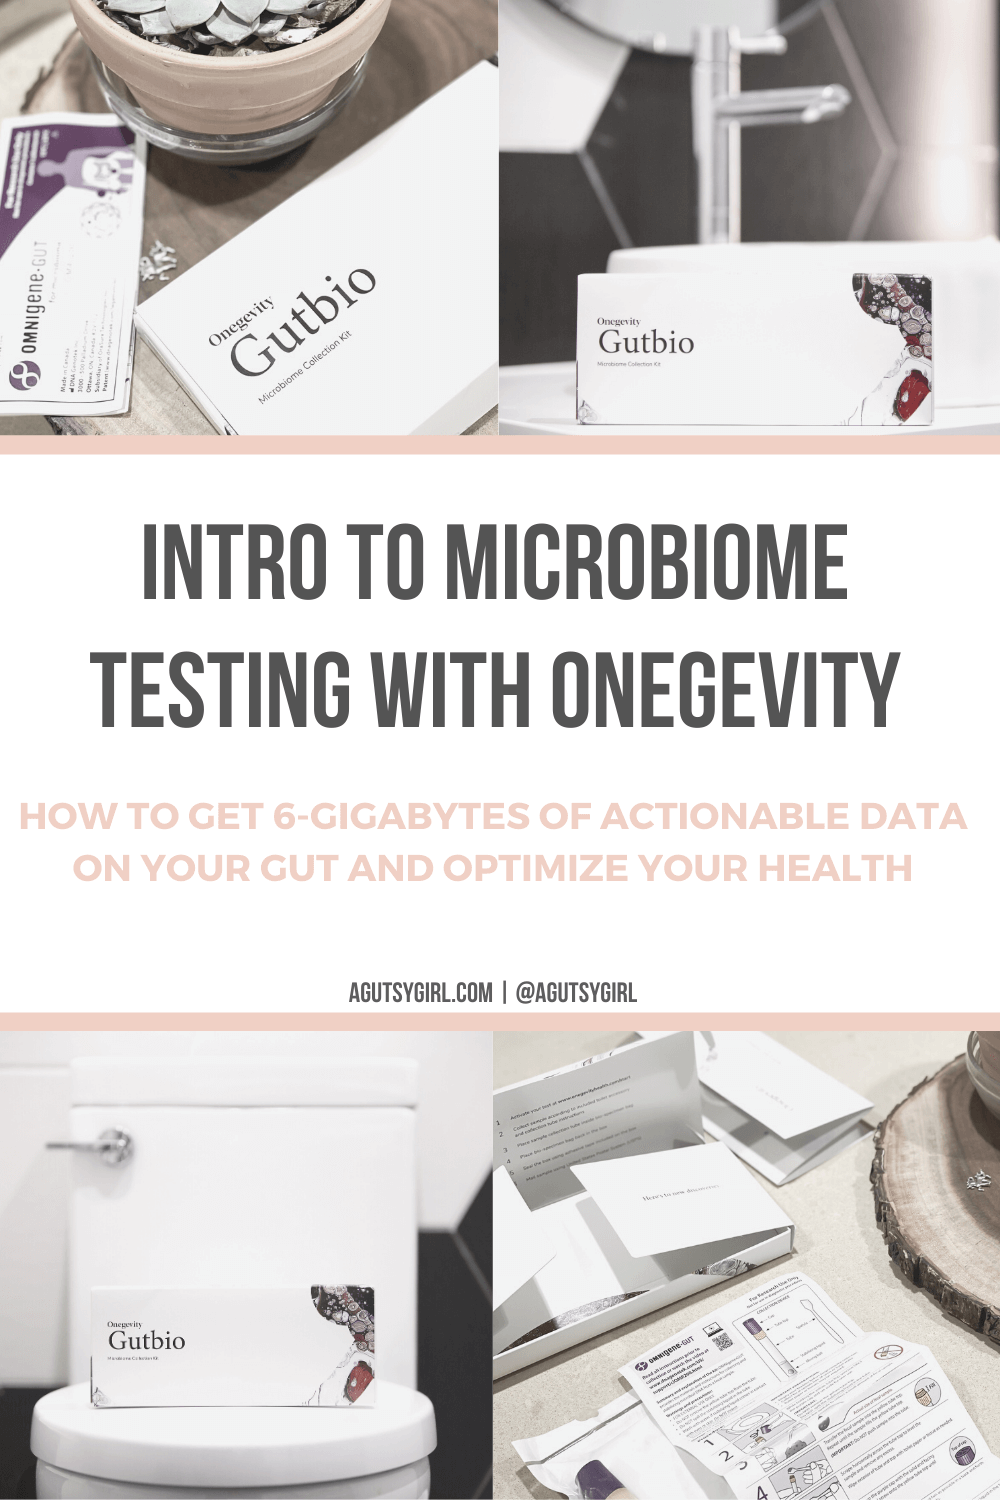 Intro to Microbiome Testing with Onegevity agutsygirl.com Gutbio #guthealth #microbiome #gut